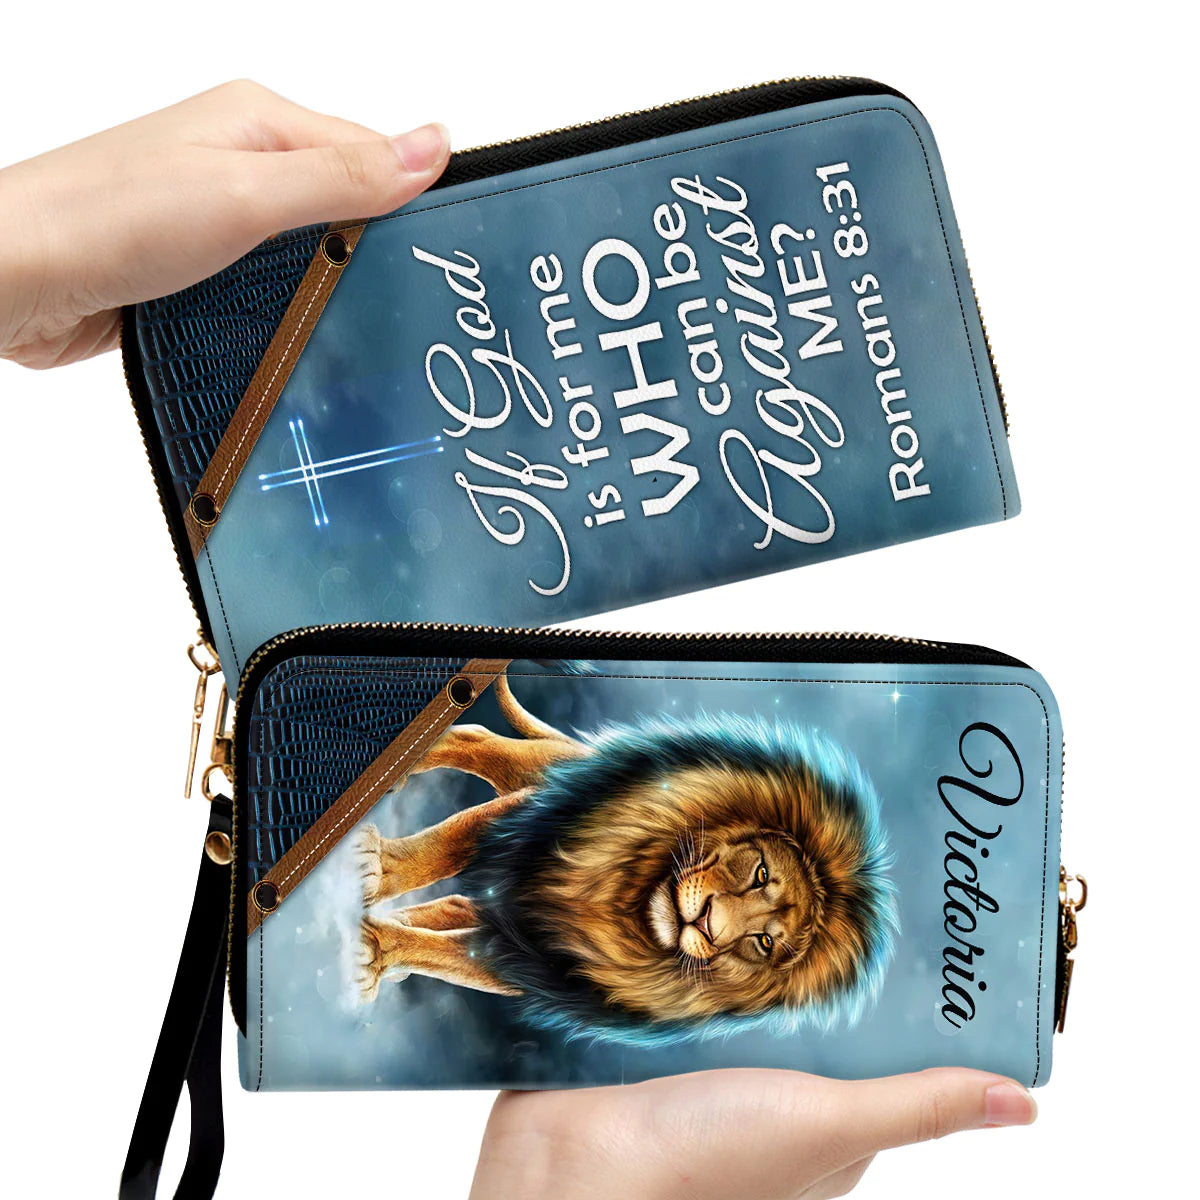 Christianart Designer Handbags, If God Is For Me Who Can Be Against Me Romans 8:31, Personalized Gifts, Gifts for Women. - Christian Art Bag